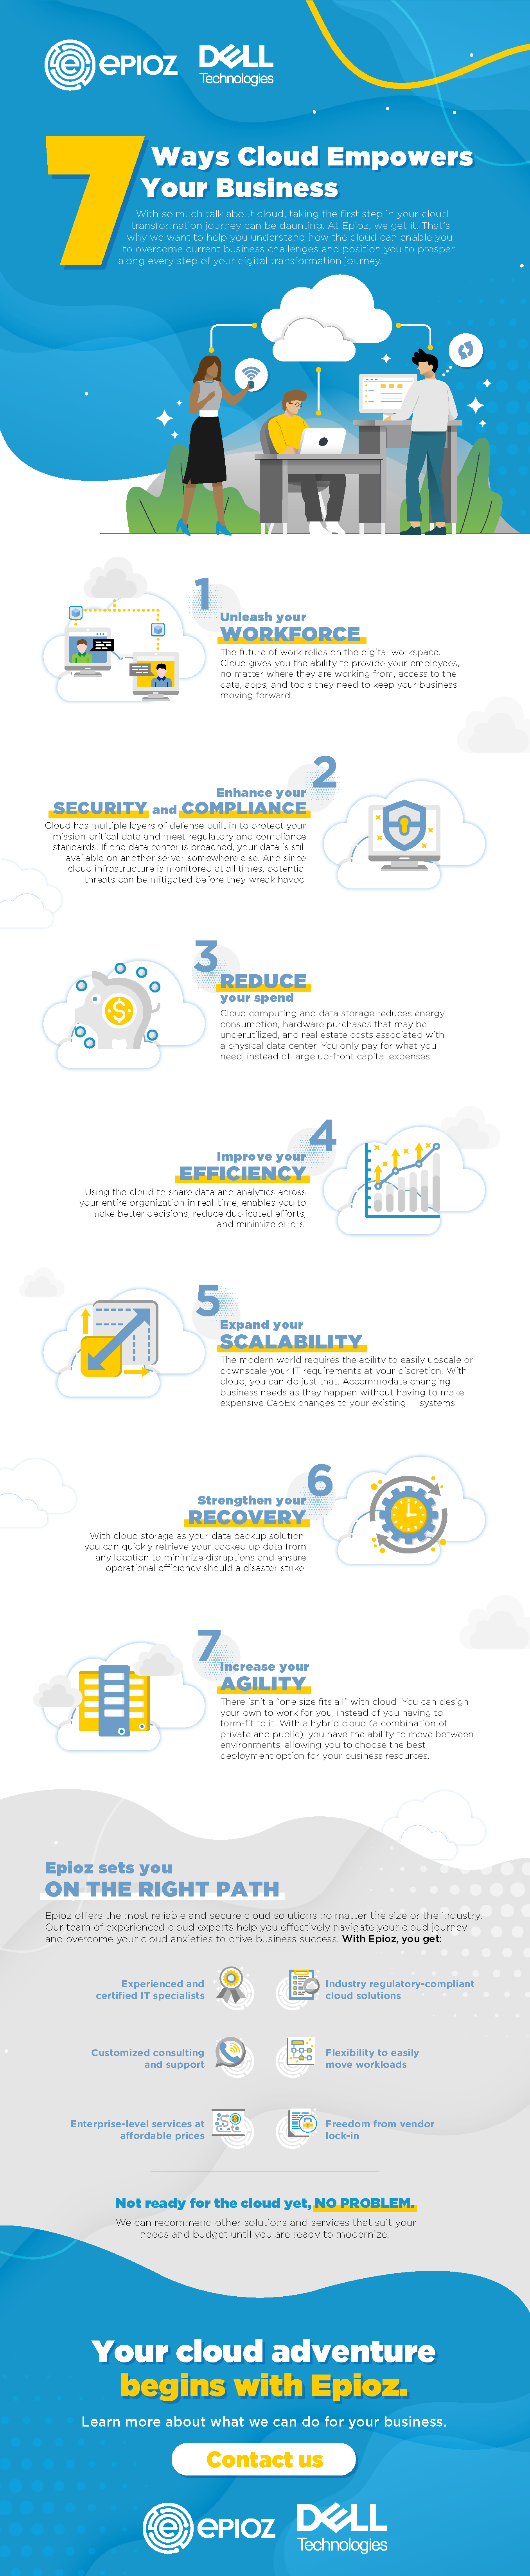 Long scrolling infographic on the topic of cloud for Epioz using flat illustrations and icons primarily blue and white with accents of yellow